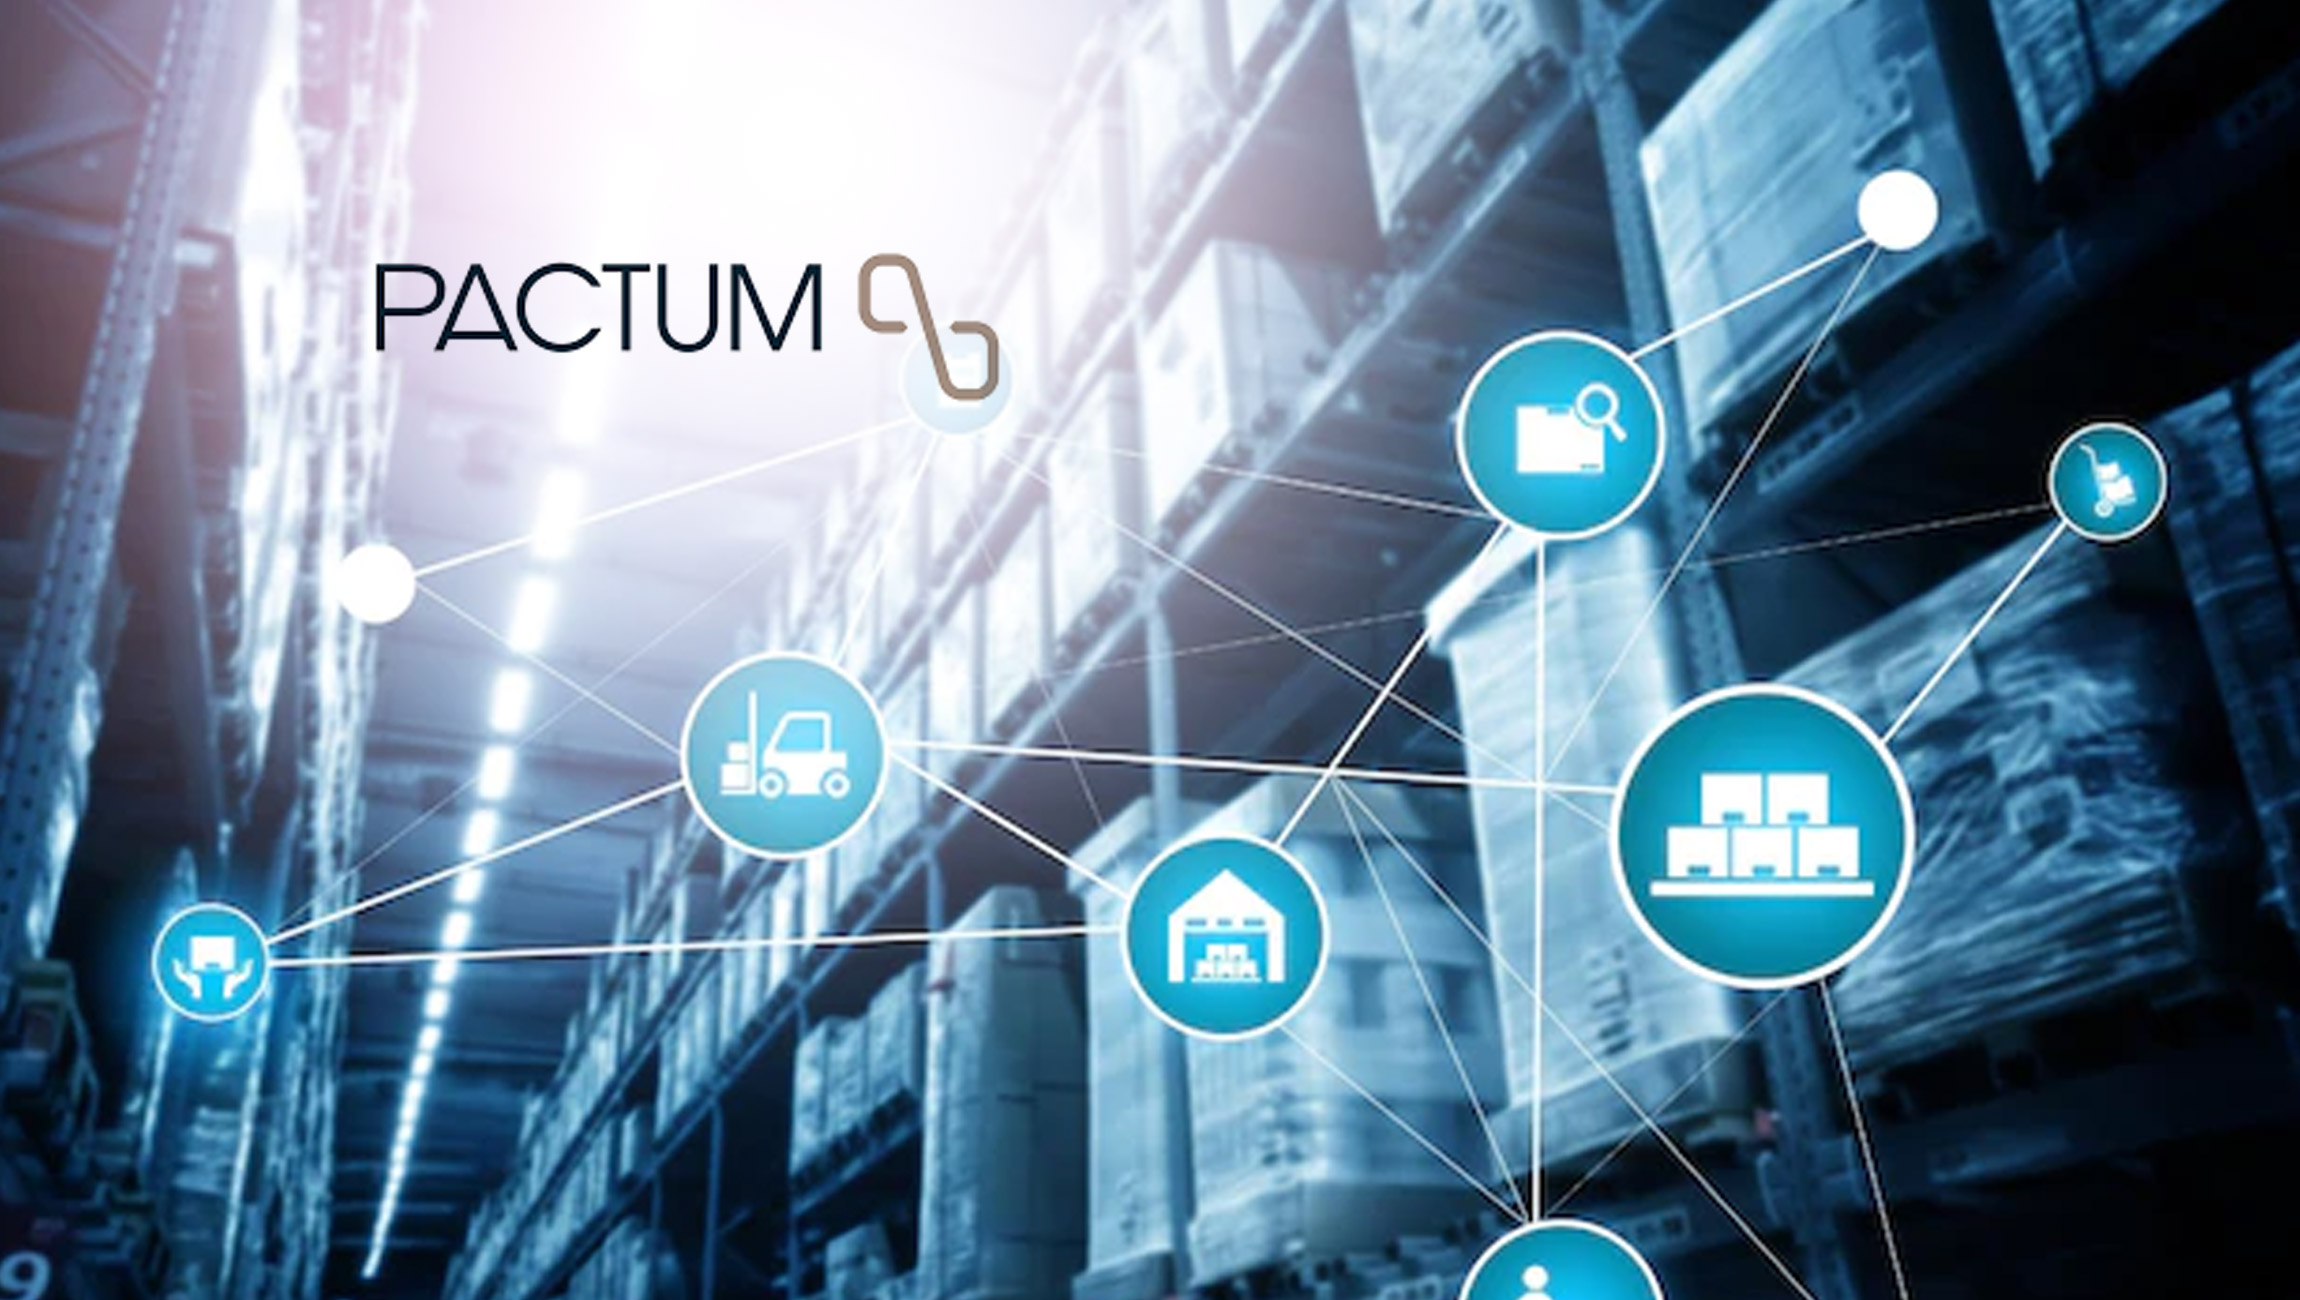 Pactum Named a 2022 Gartner Cool Vendor in Sourcing and Procurement for Supply Chain